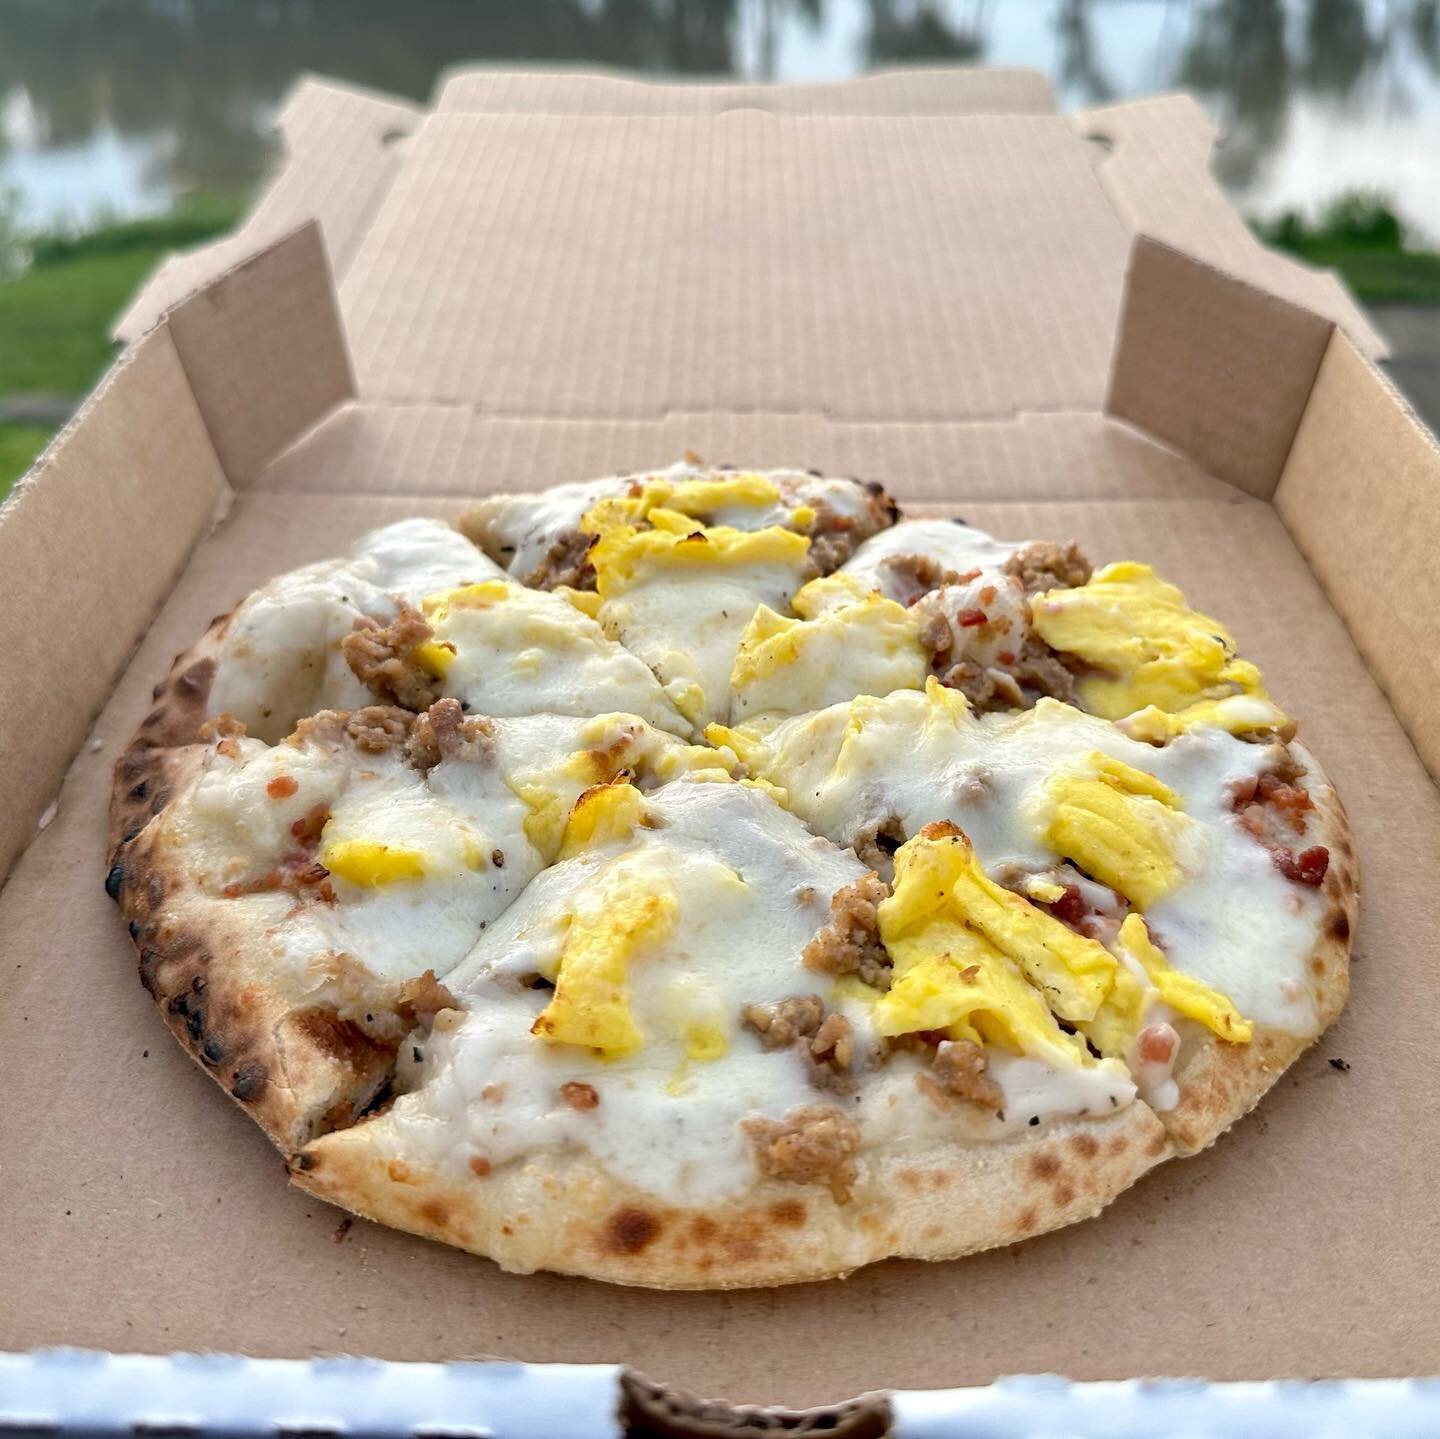 Breakfast pizzas. Breakfast quesadillas. This Saturday morning at Myriad Downtown. 🤘

Doors open up at 10am! 

We&rsquo;ve got mimosas,
bloody marys, and beers. 

Mother Truckers Pizzeria will be on site serving it up from 10a-1p 🍺

Grab a friend. 